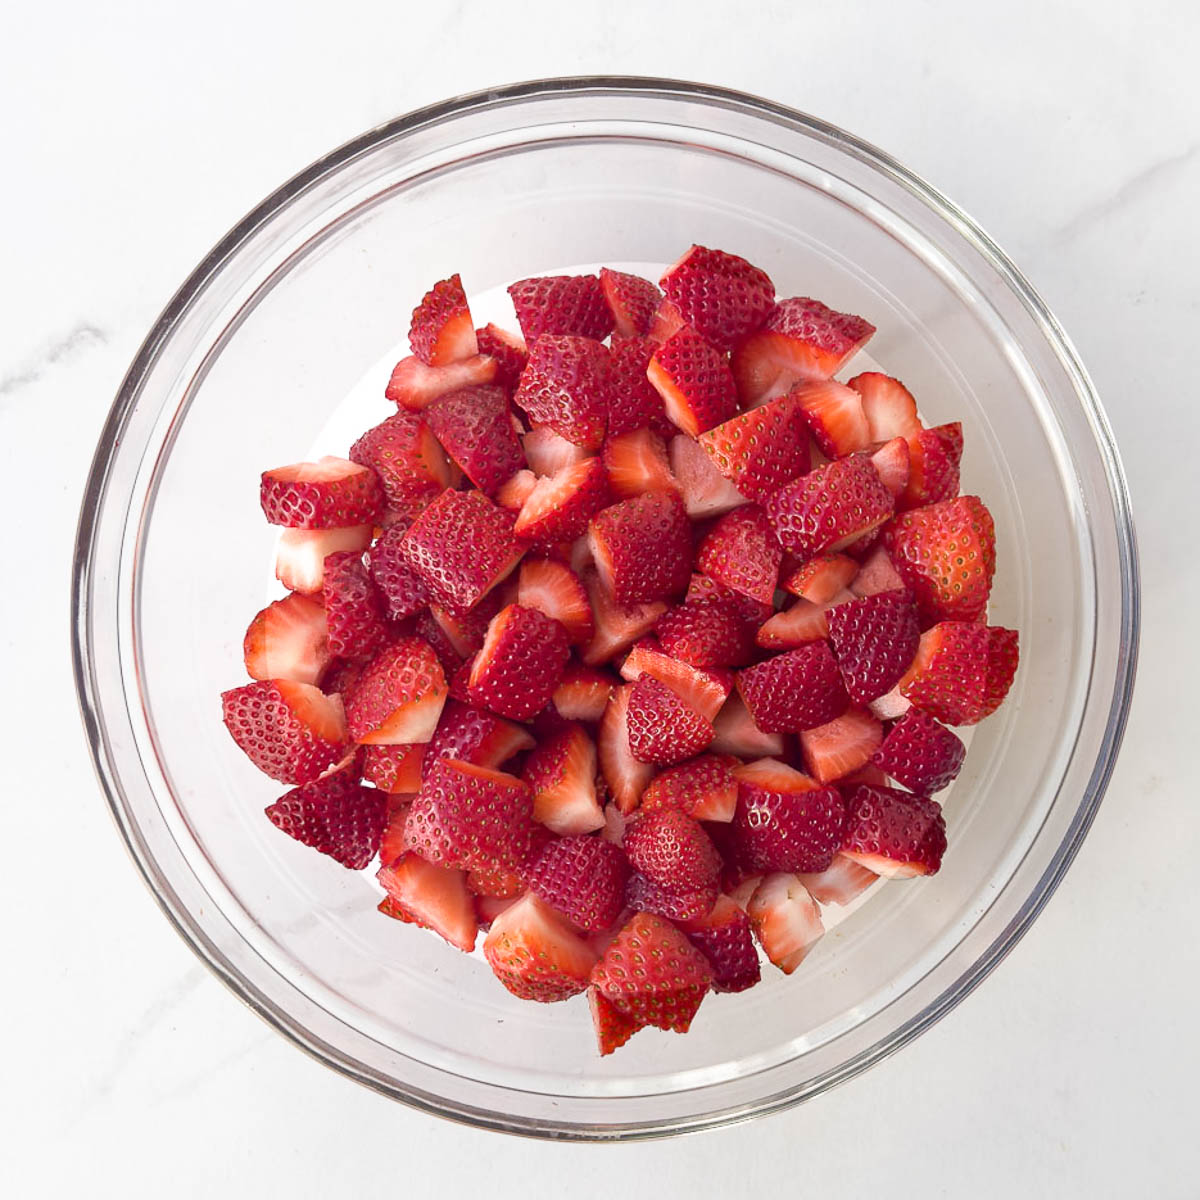  A glass bowl filled with chopped red strawberries.